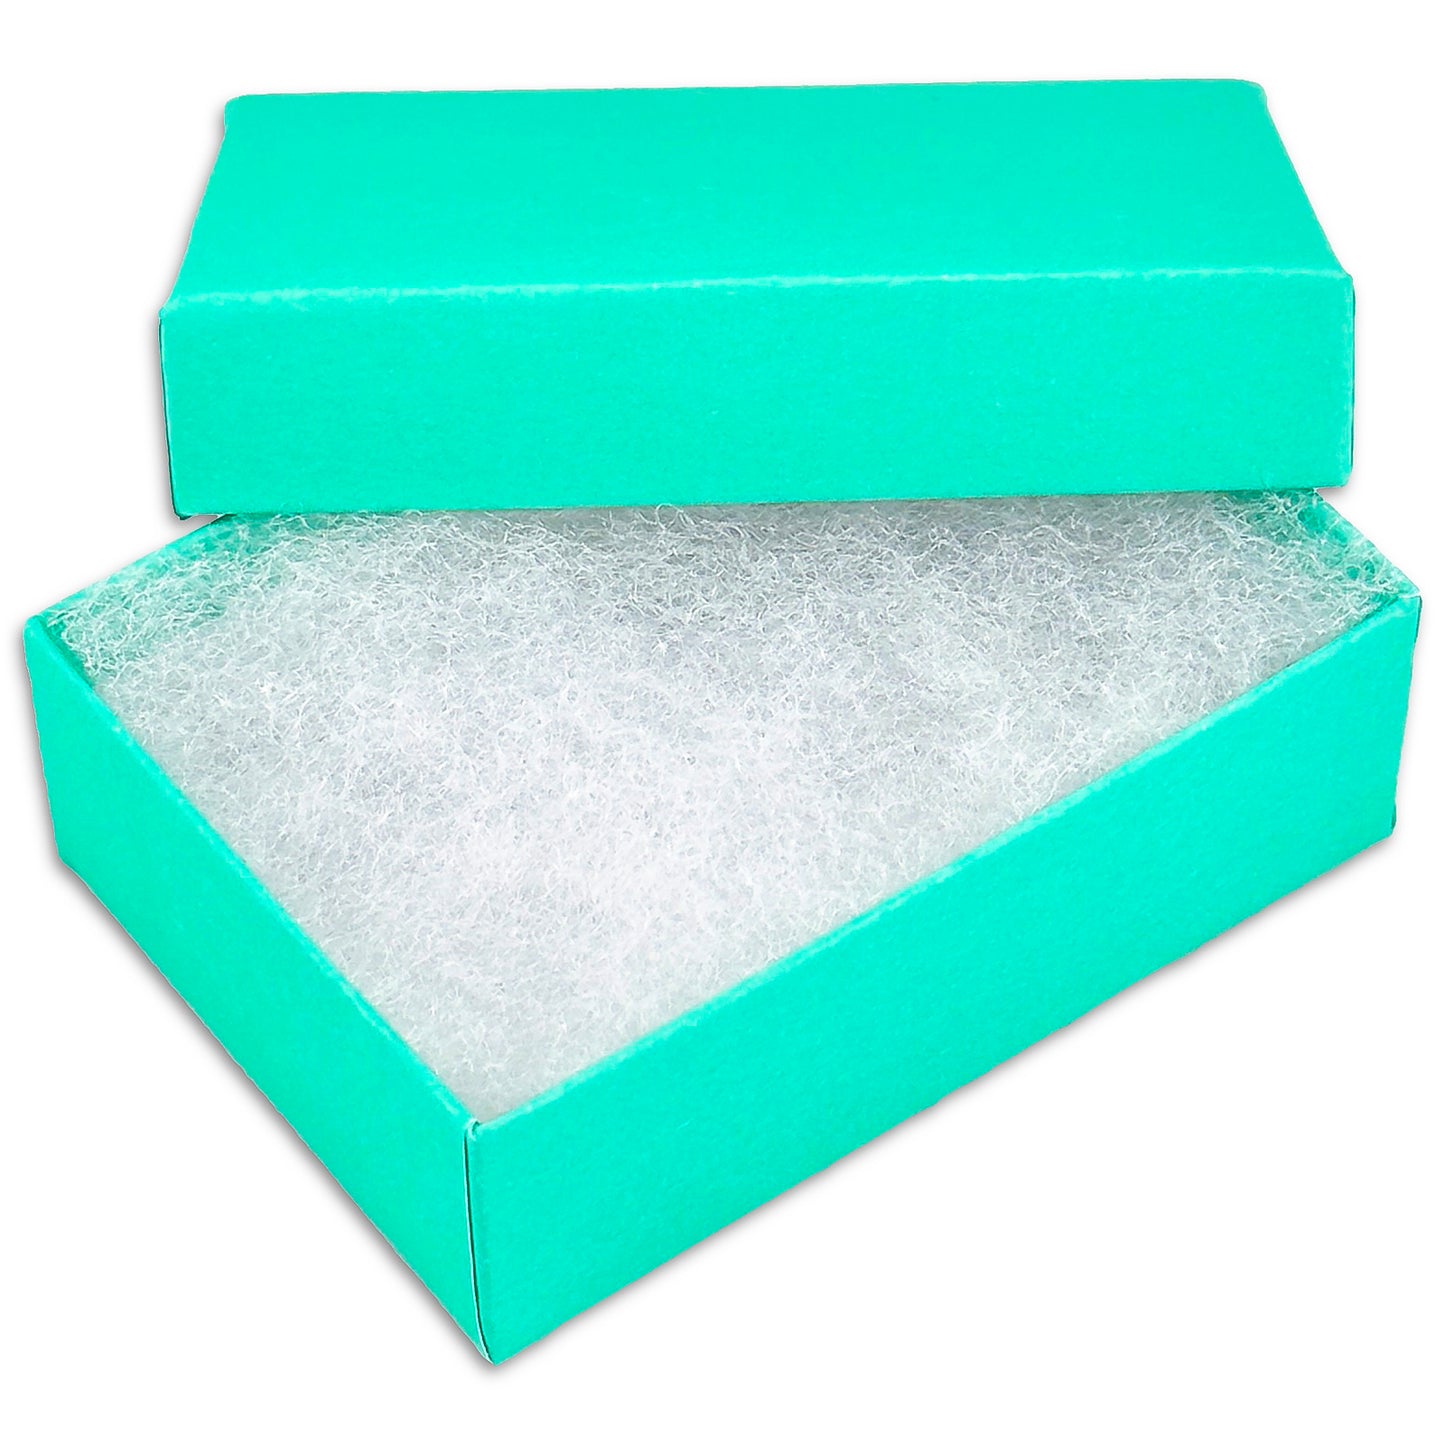 2 1/8" x 1 5/8" x 3/4" Teal Green Cotton Filled Paper Box